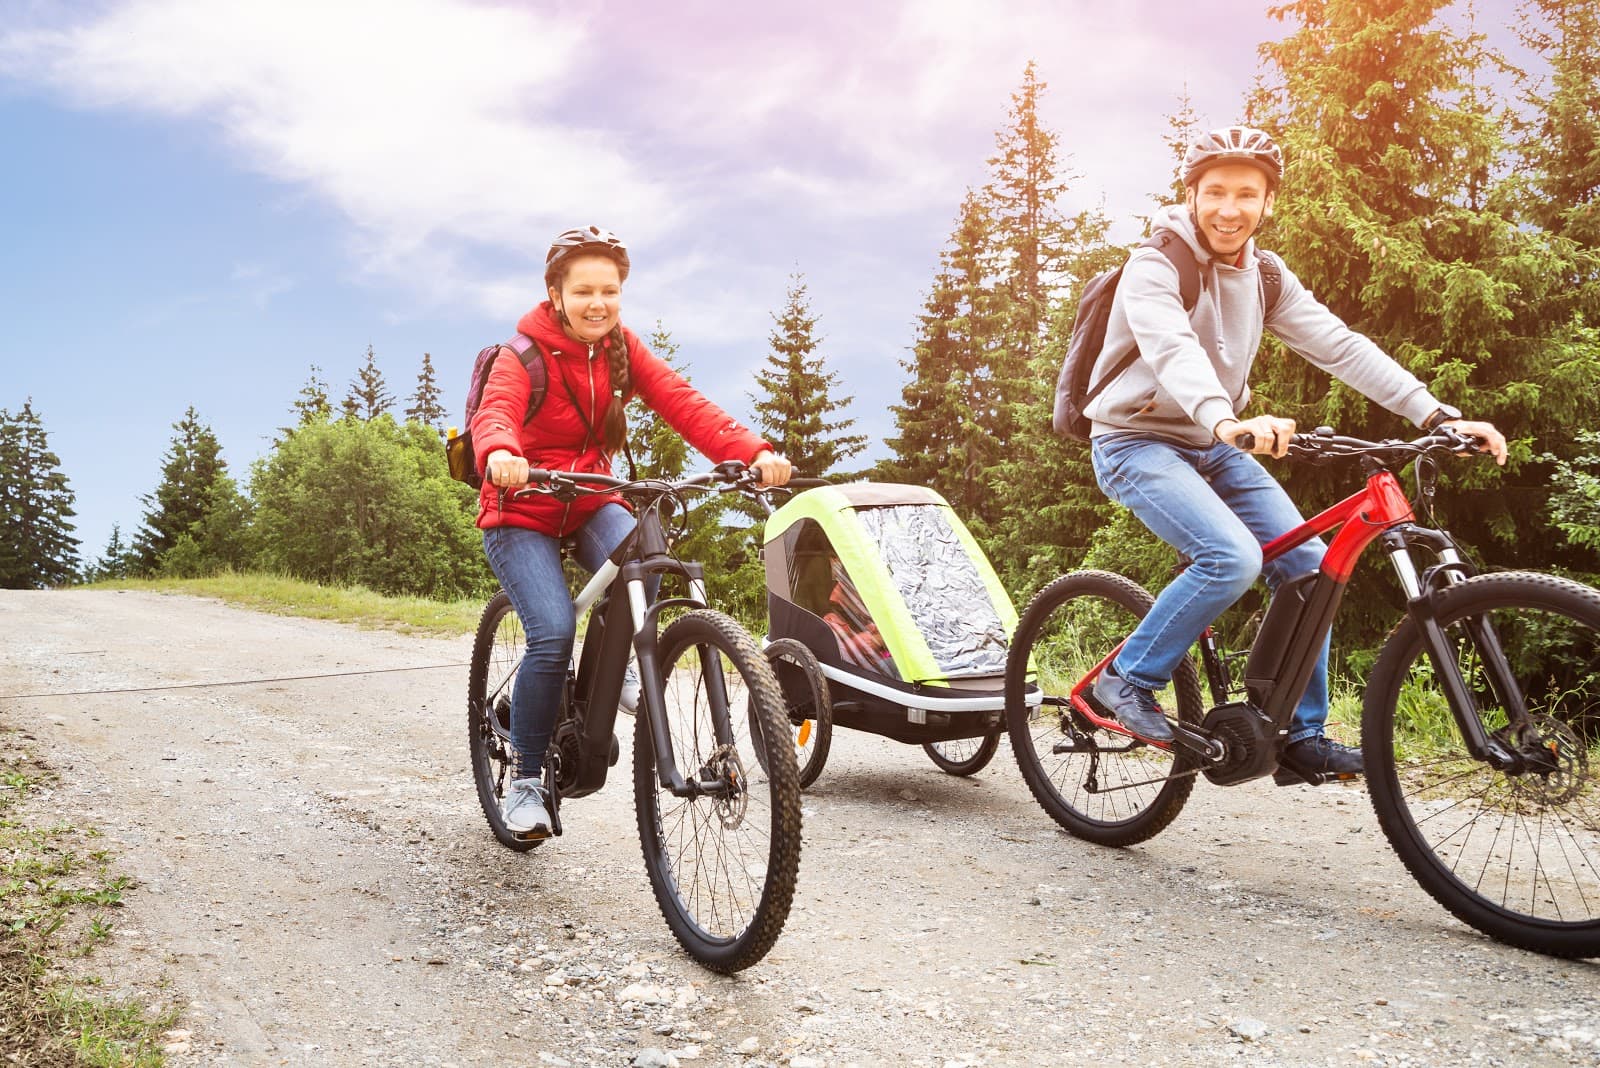 Is It Safe To Take Kids On An eBike